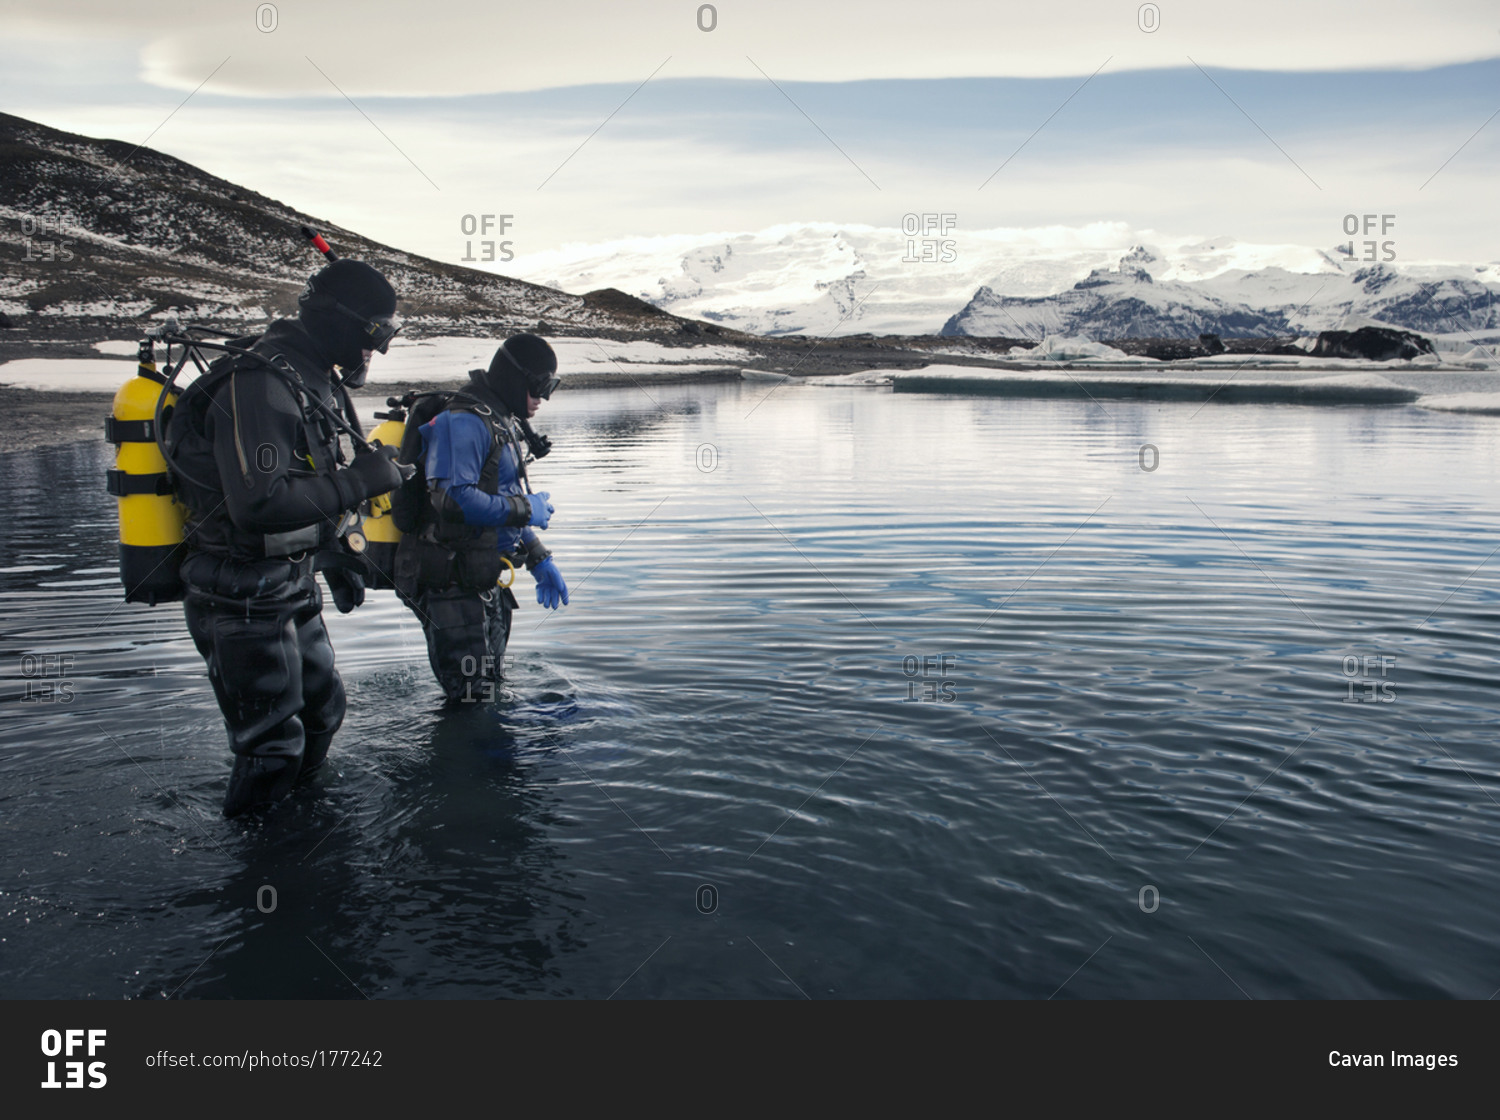 Two scuba divers walk into the water in Iceland